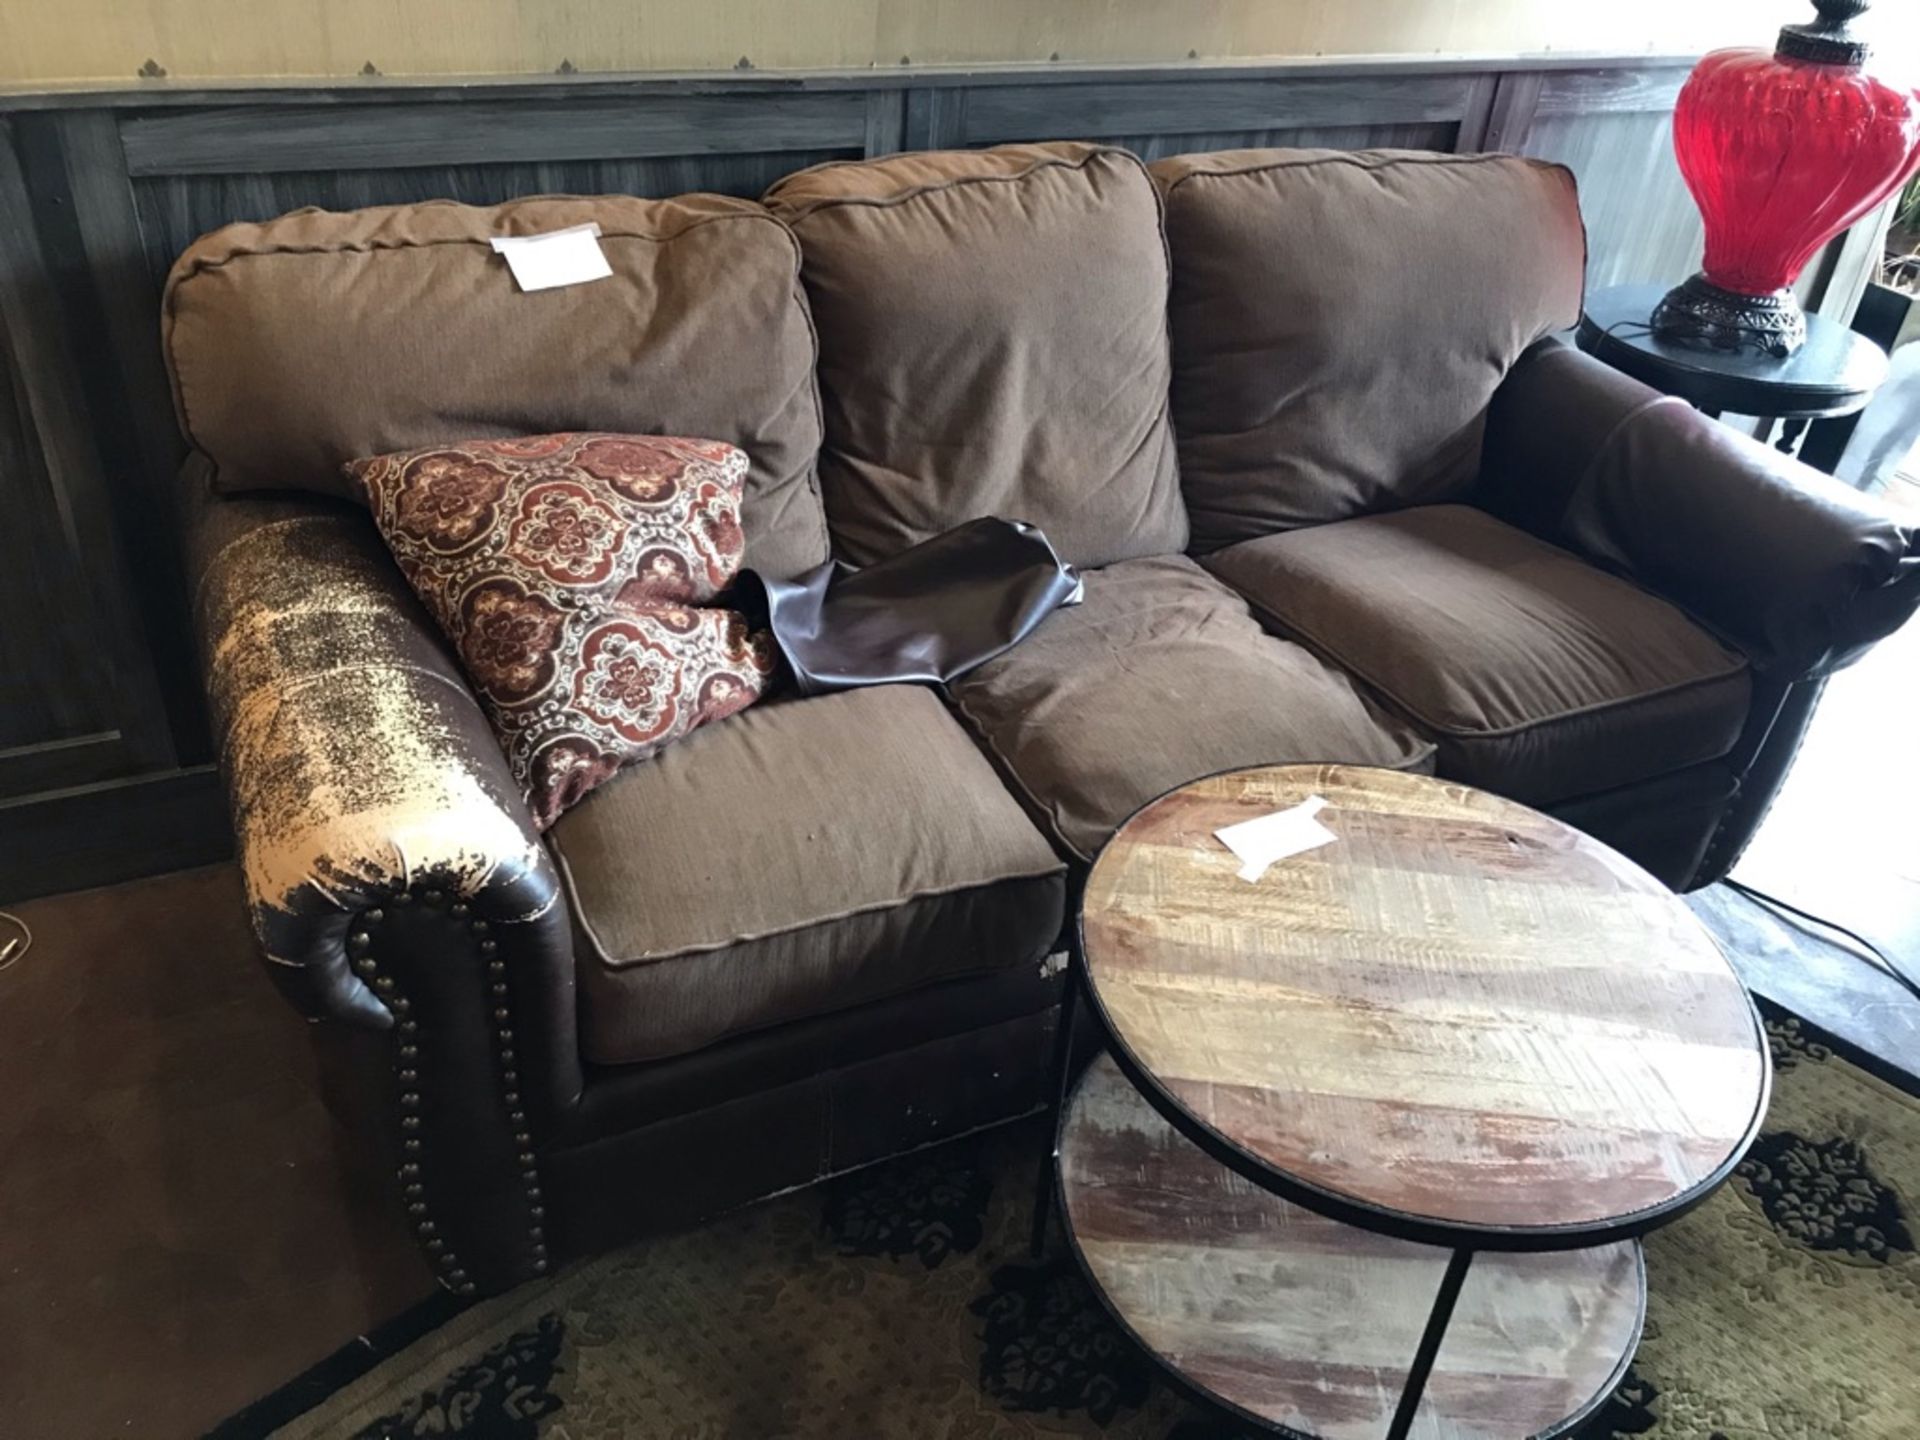 LOT OF: 7' BROWN COUCH W/ 25" ROUND WOOD/METAL TABLE